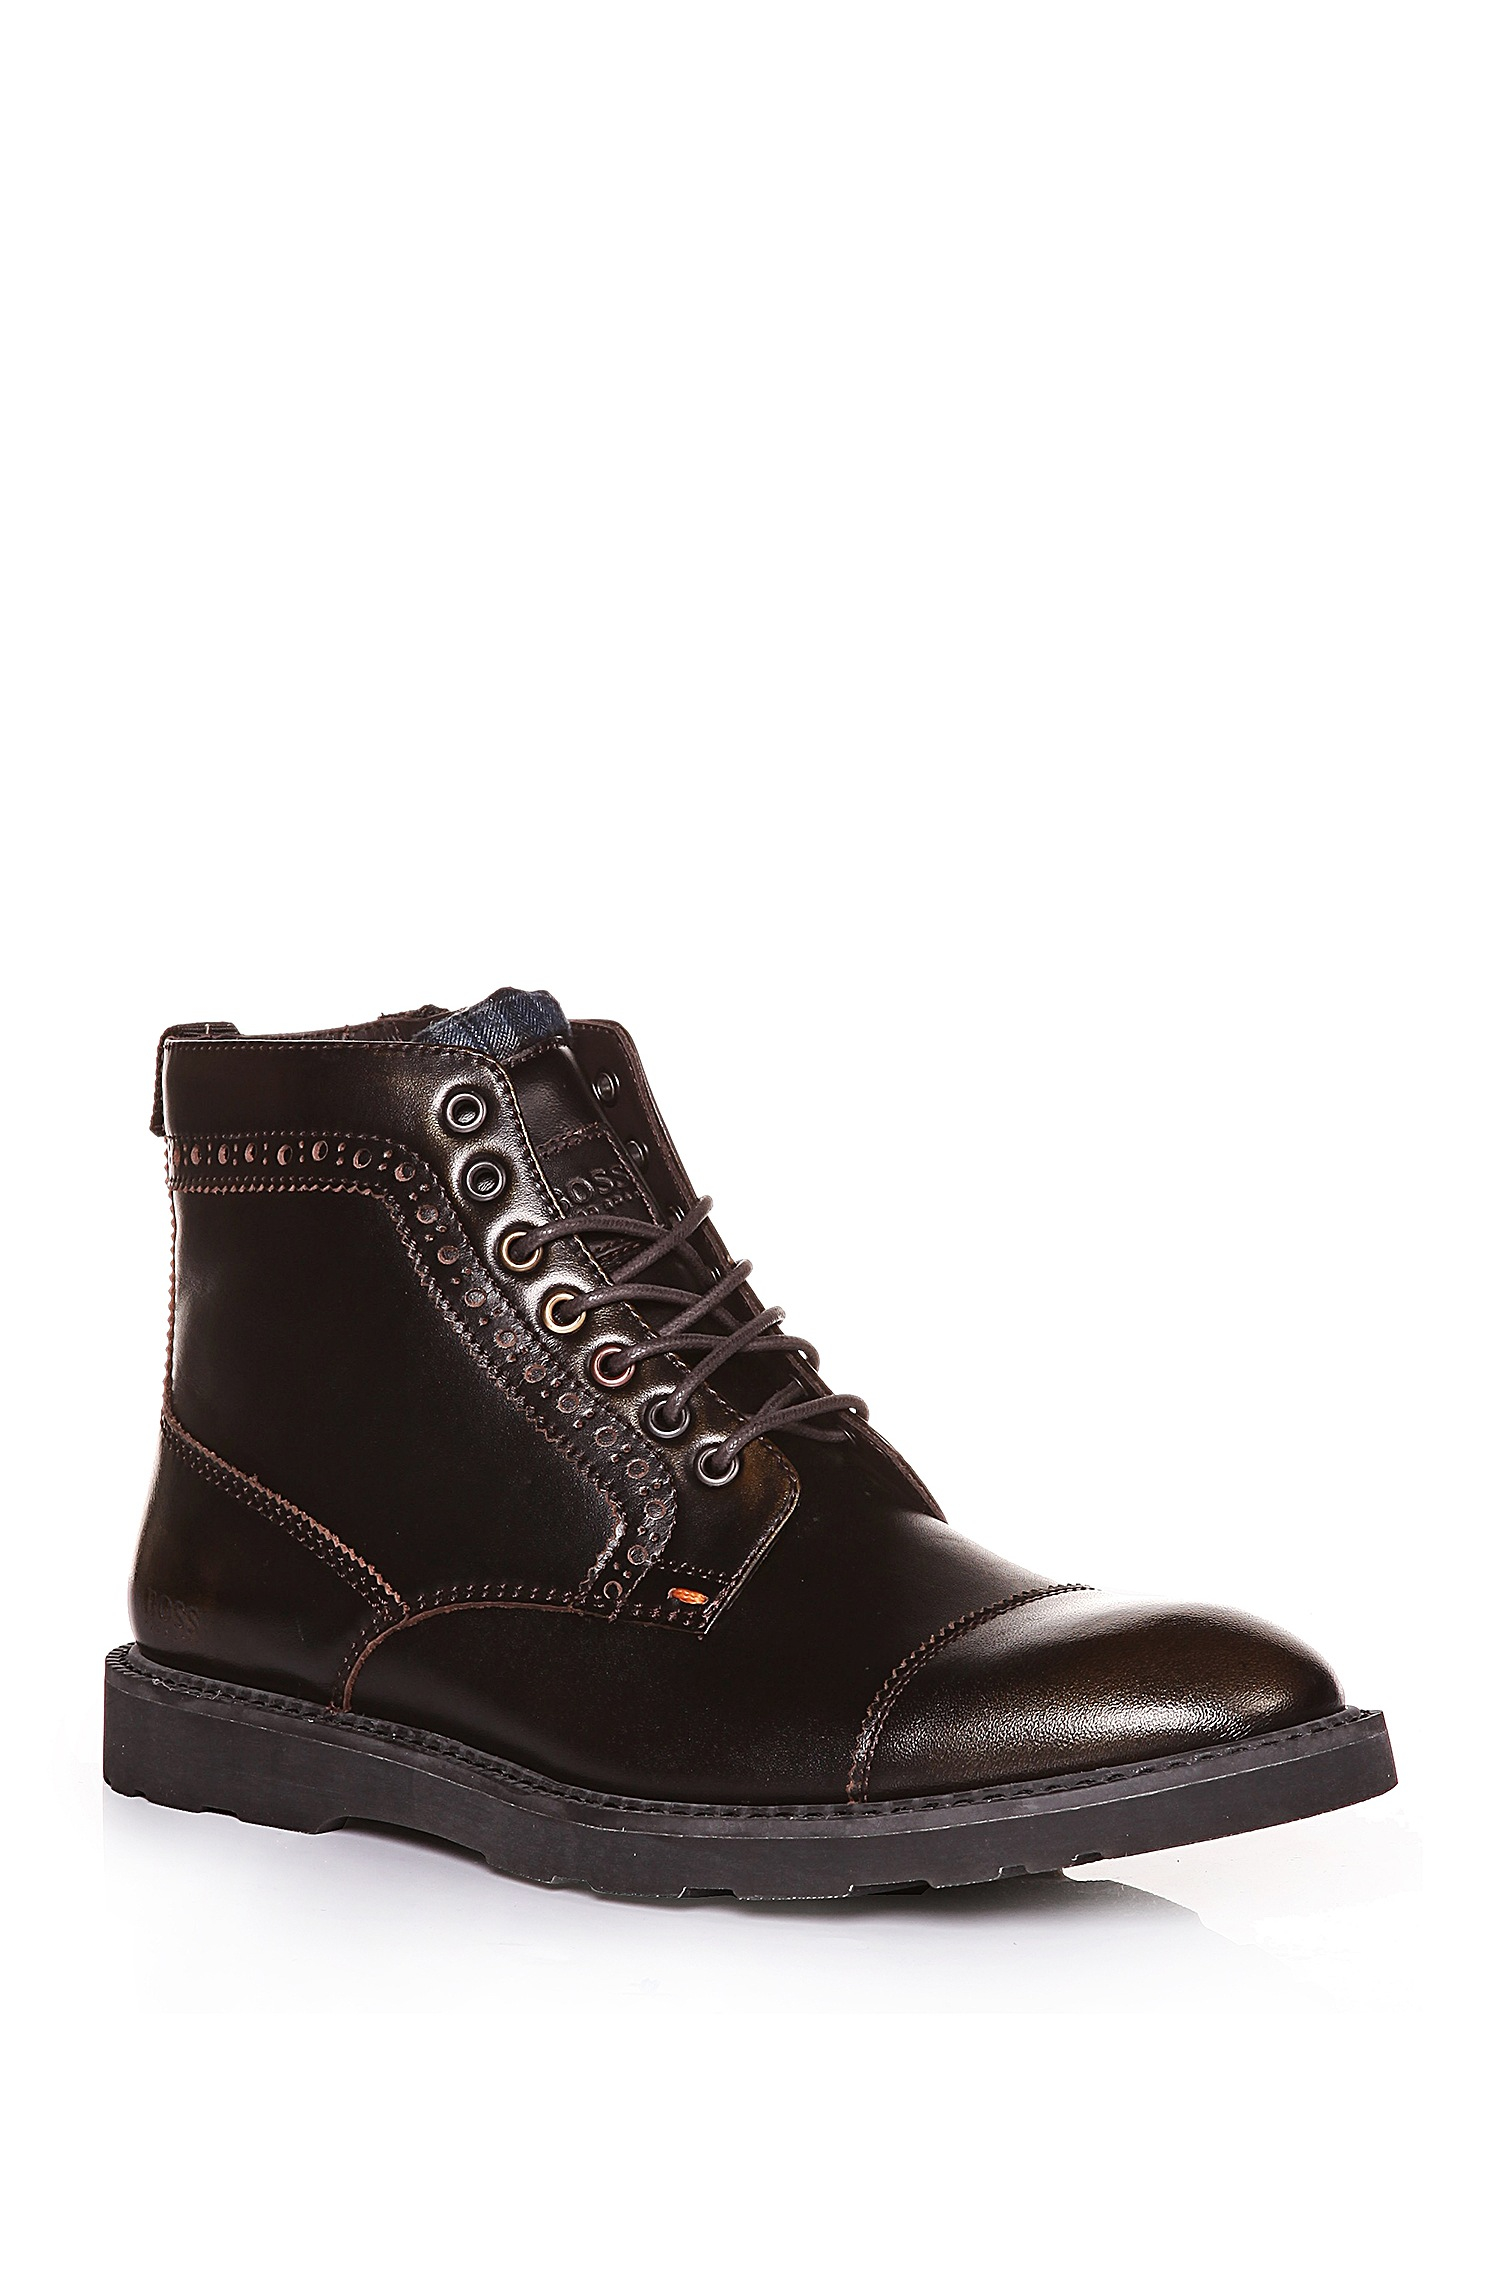 BOSS Orange 'newborn' | Leather Lace-up Ankle Boots in Dark Brown for Men - Lyst